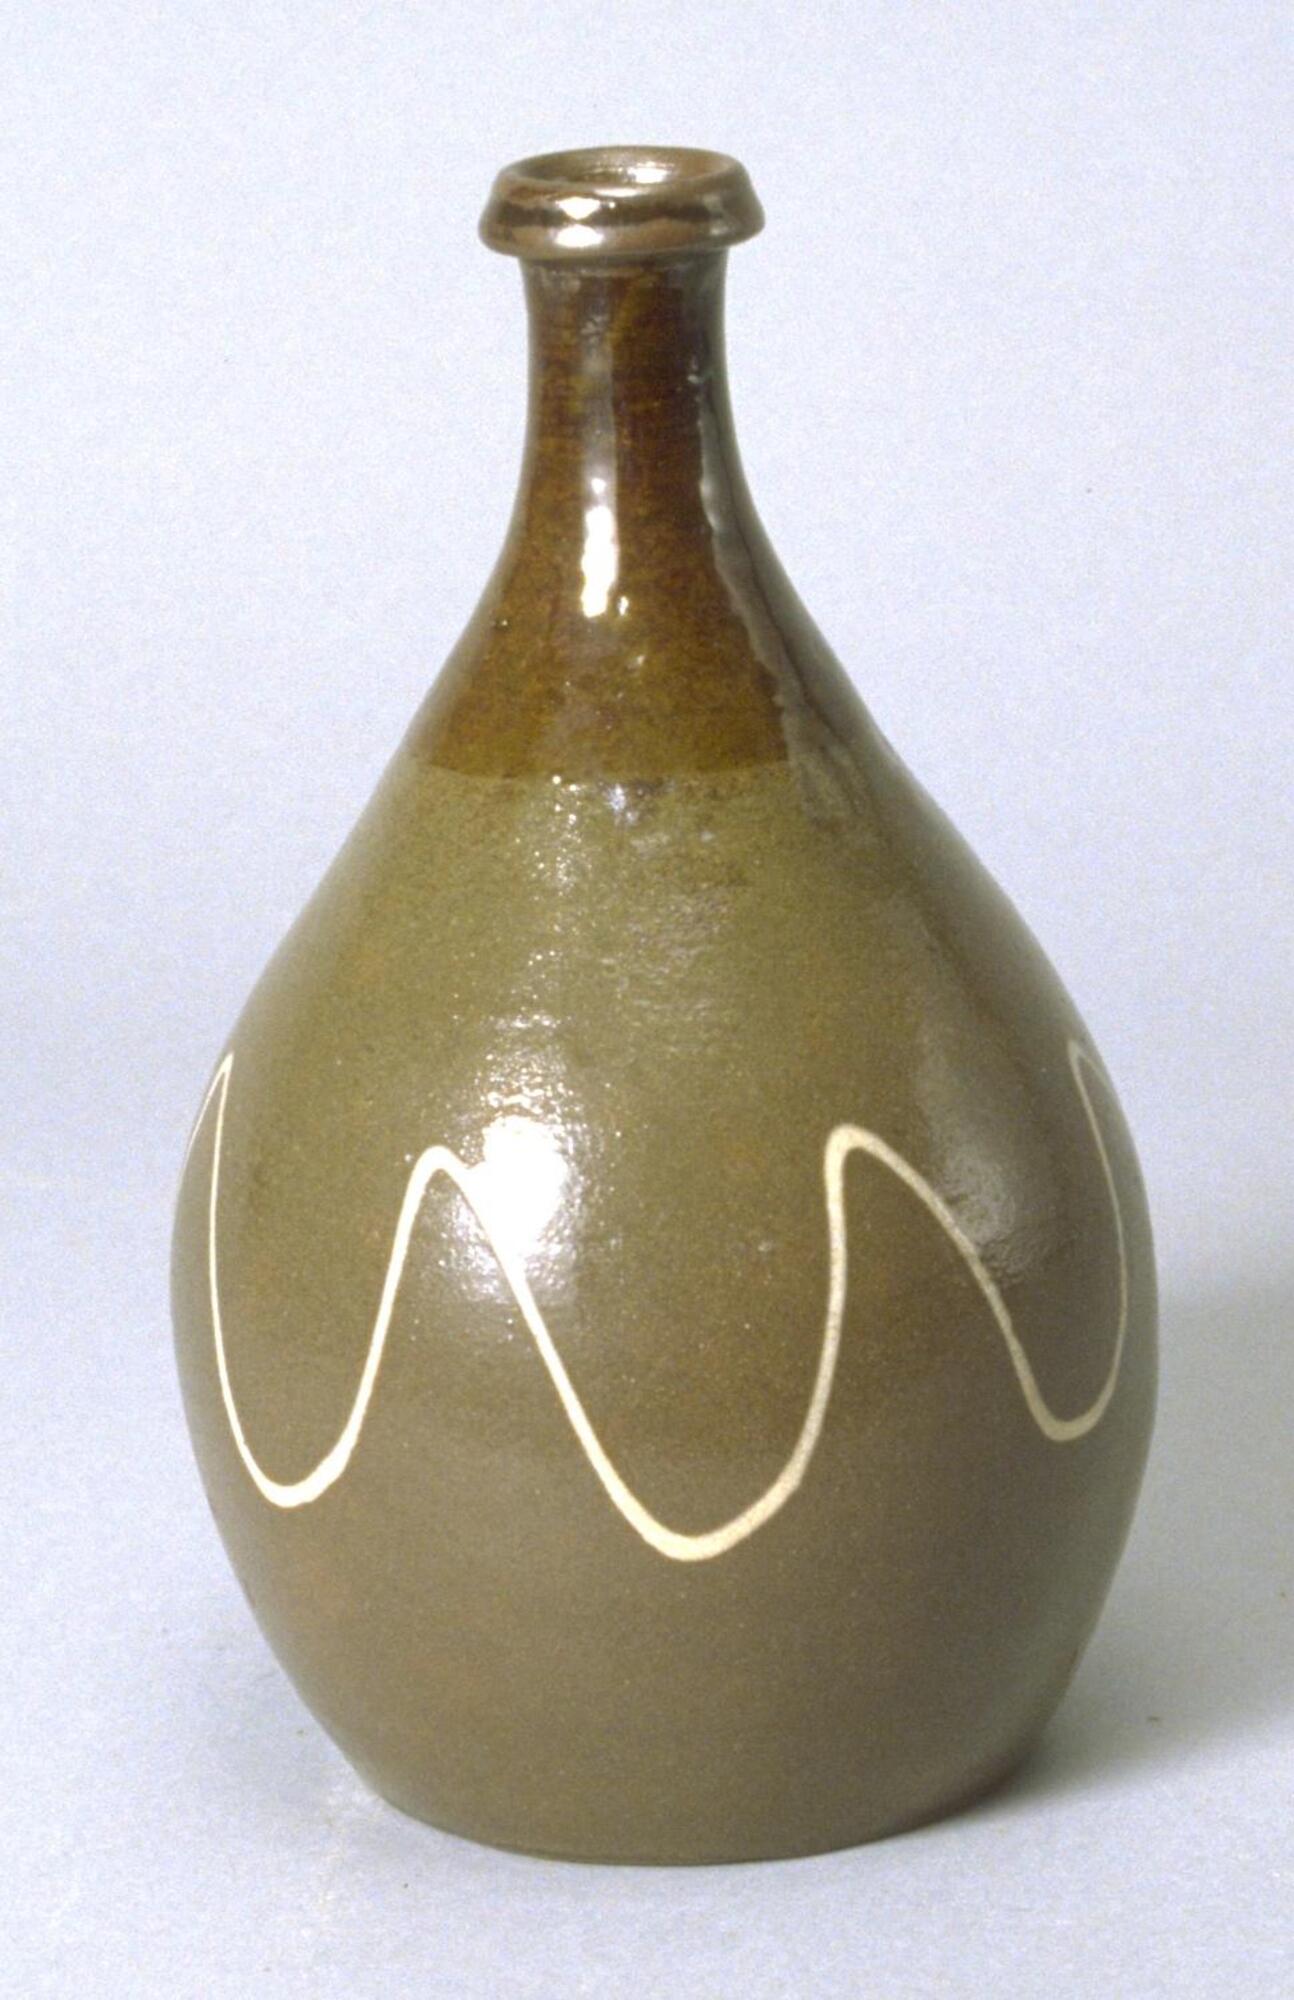 Bottle with full, rounded base that tapers into a thin neck that terminates in a lipped rim.  From the neck up, the vase has a brown glaze.  The body has a brownish gray glaze with a white drizzled squiggle decoration along it.